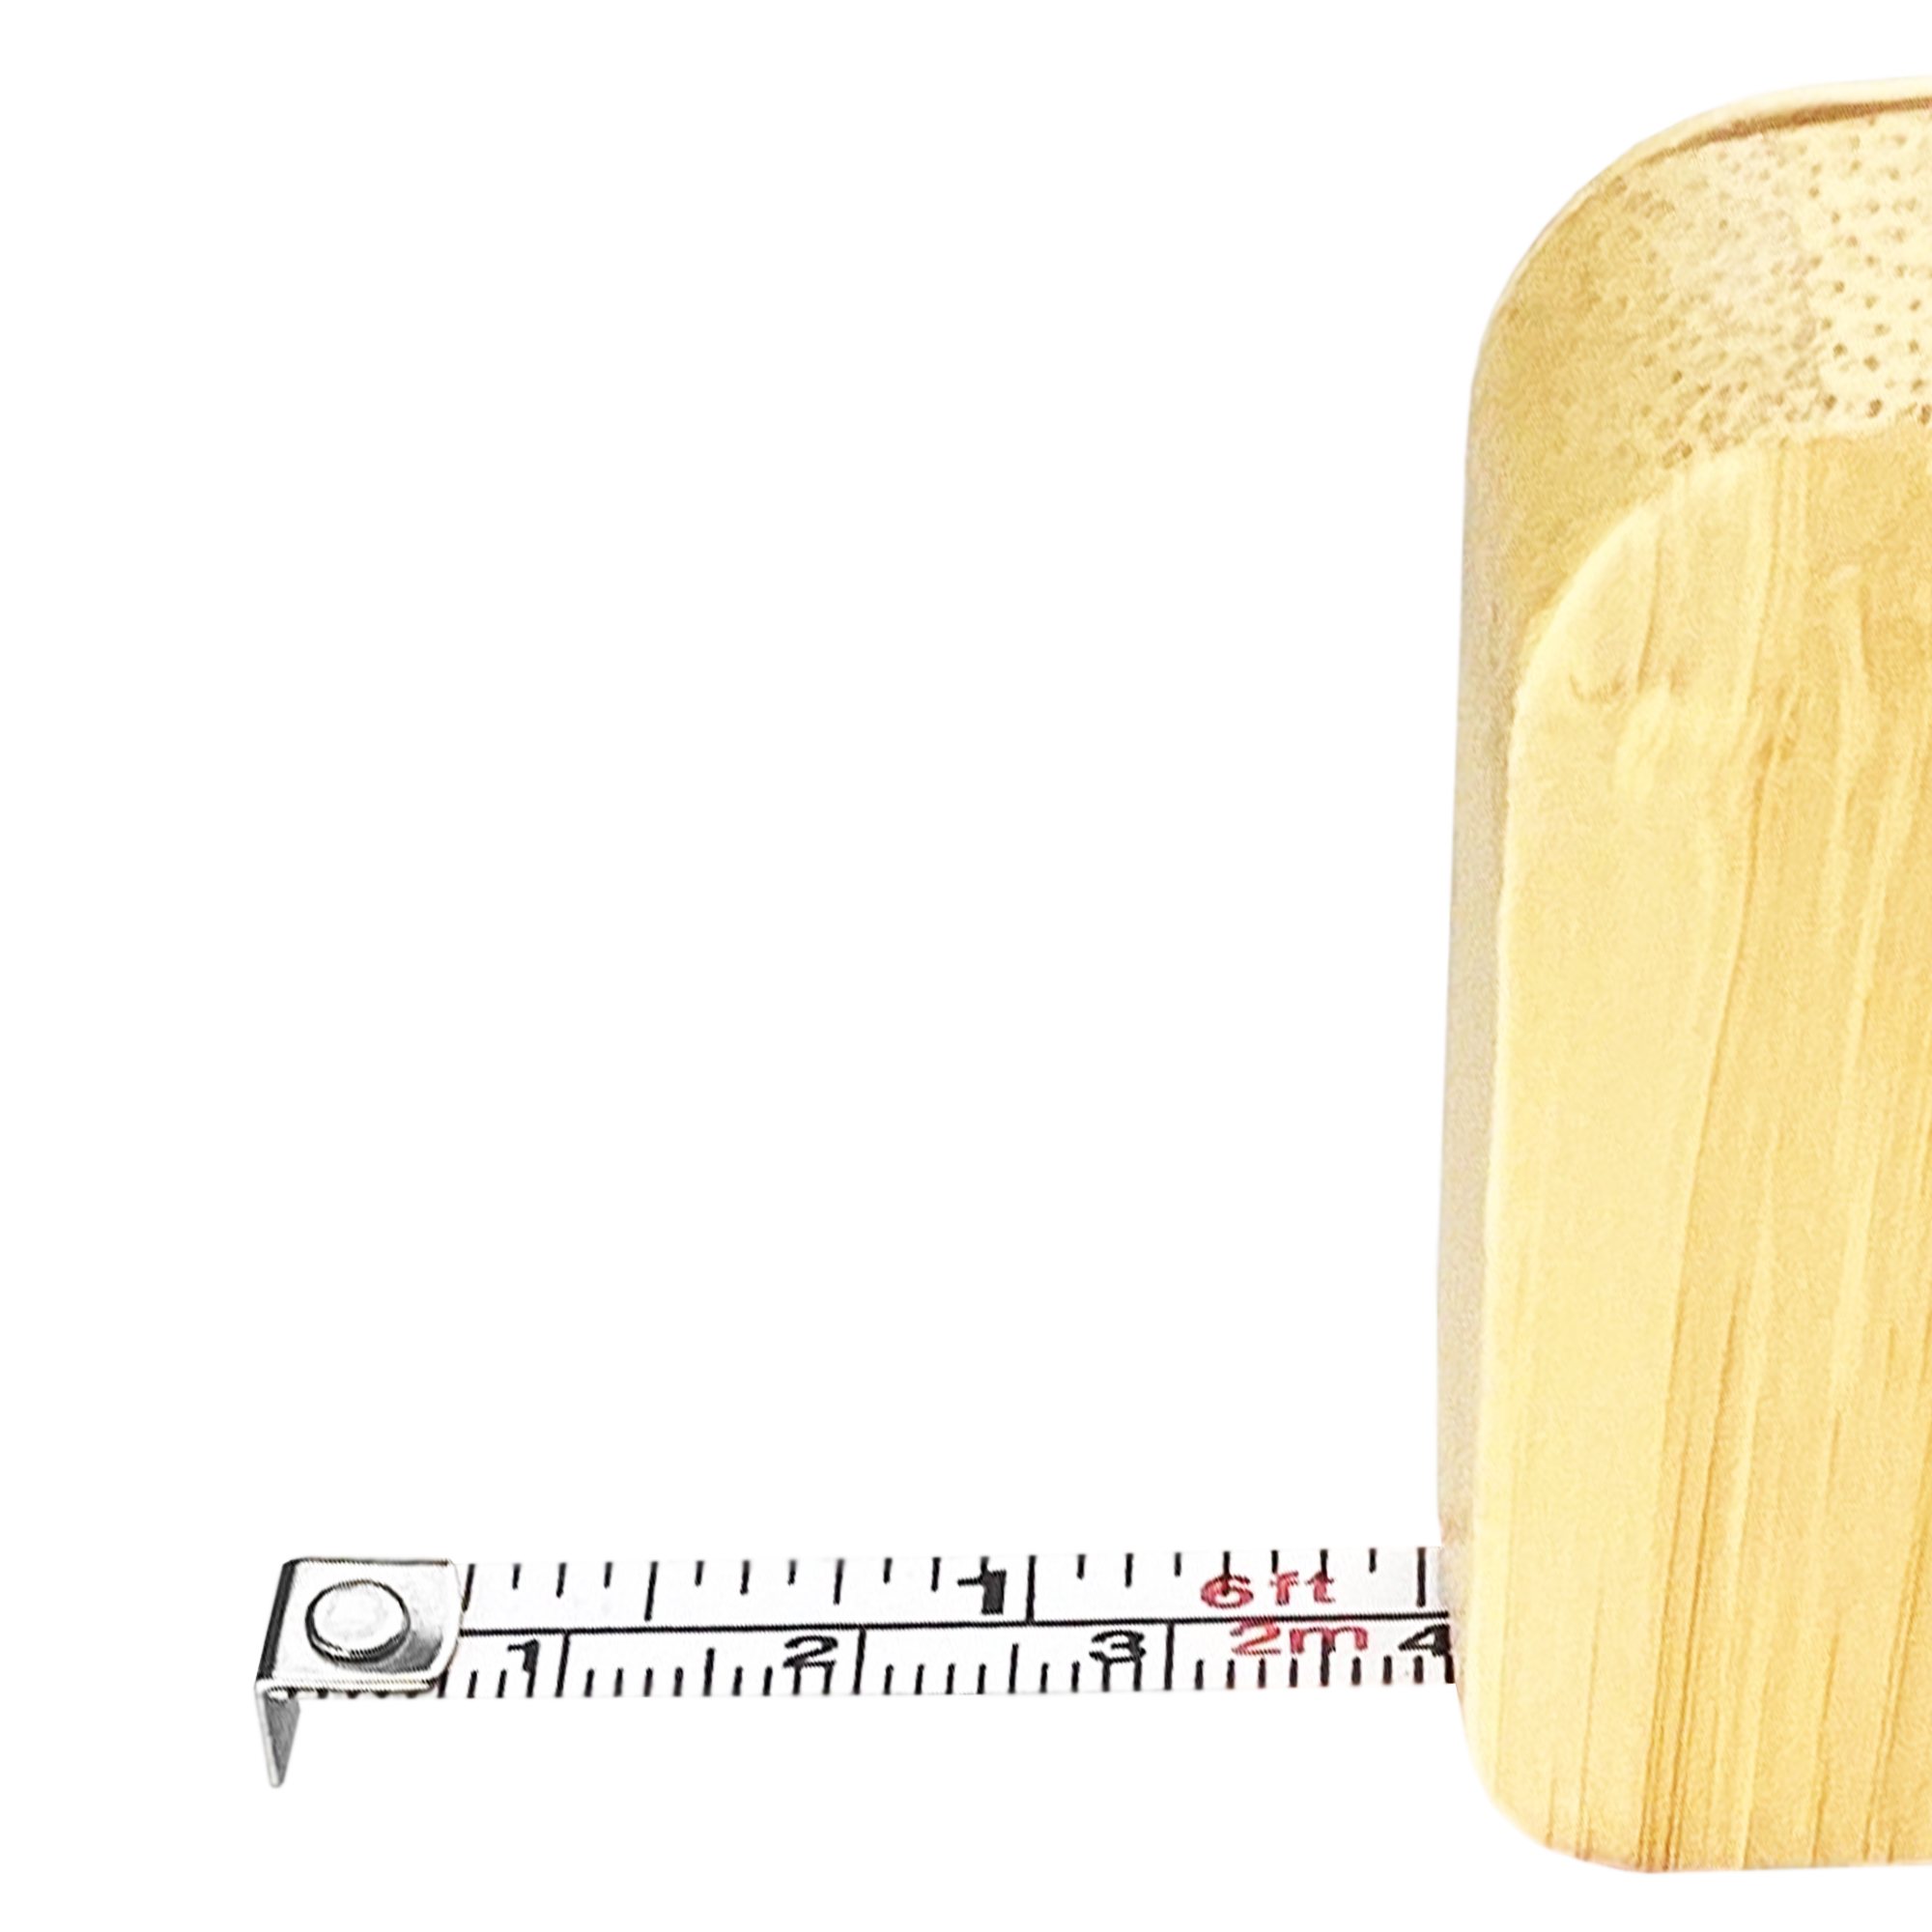 Bamboo Tape Measure Key Ring TM004 | Feature